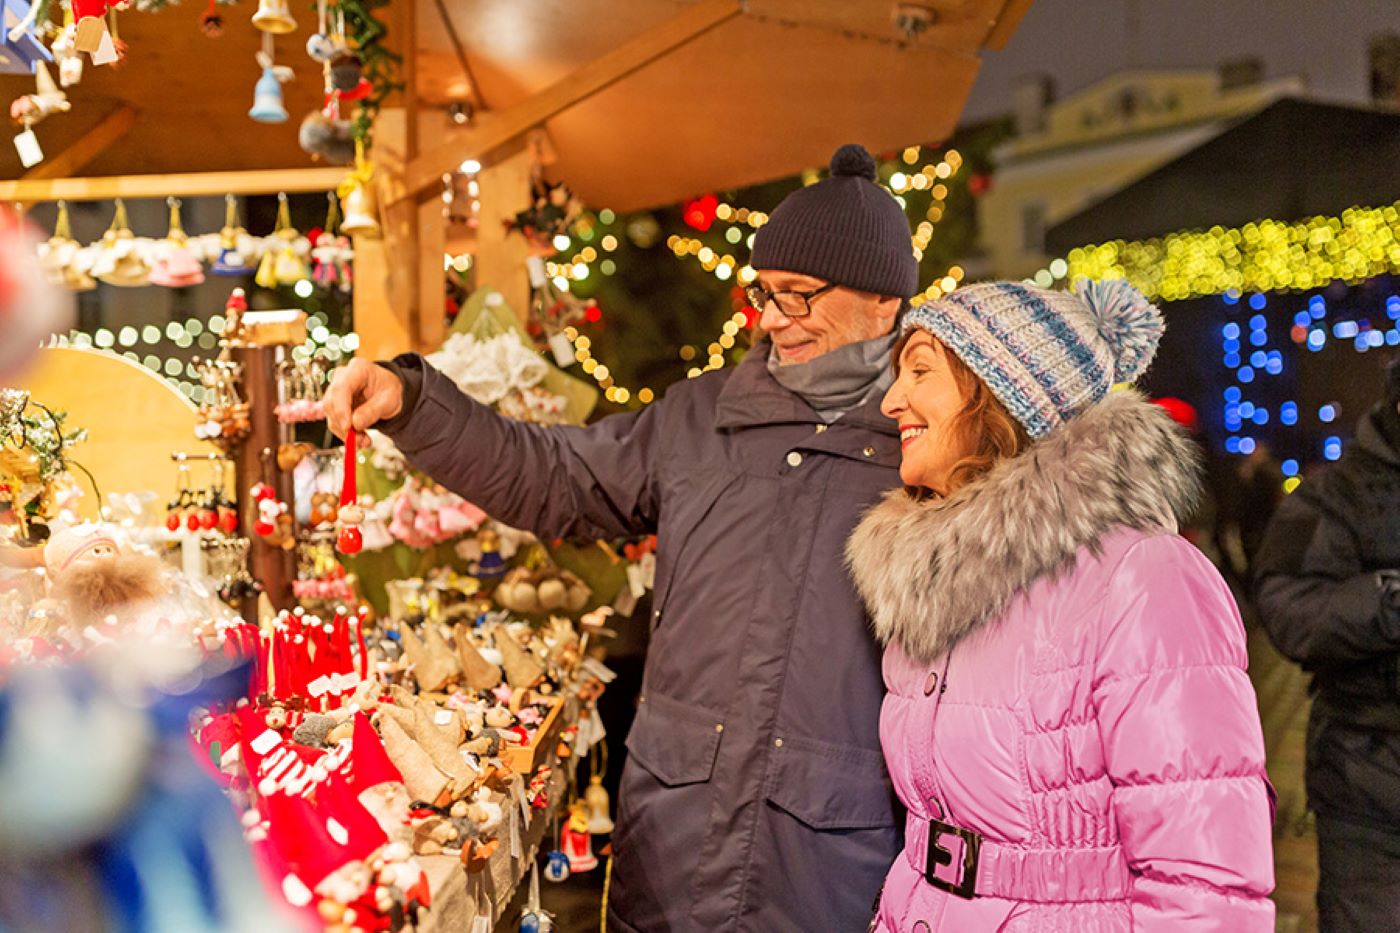 couple buying goods at a holiday market